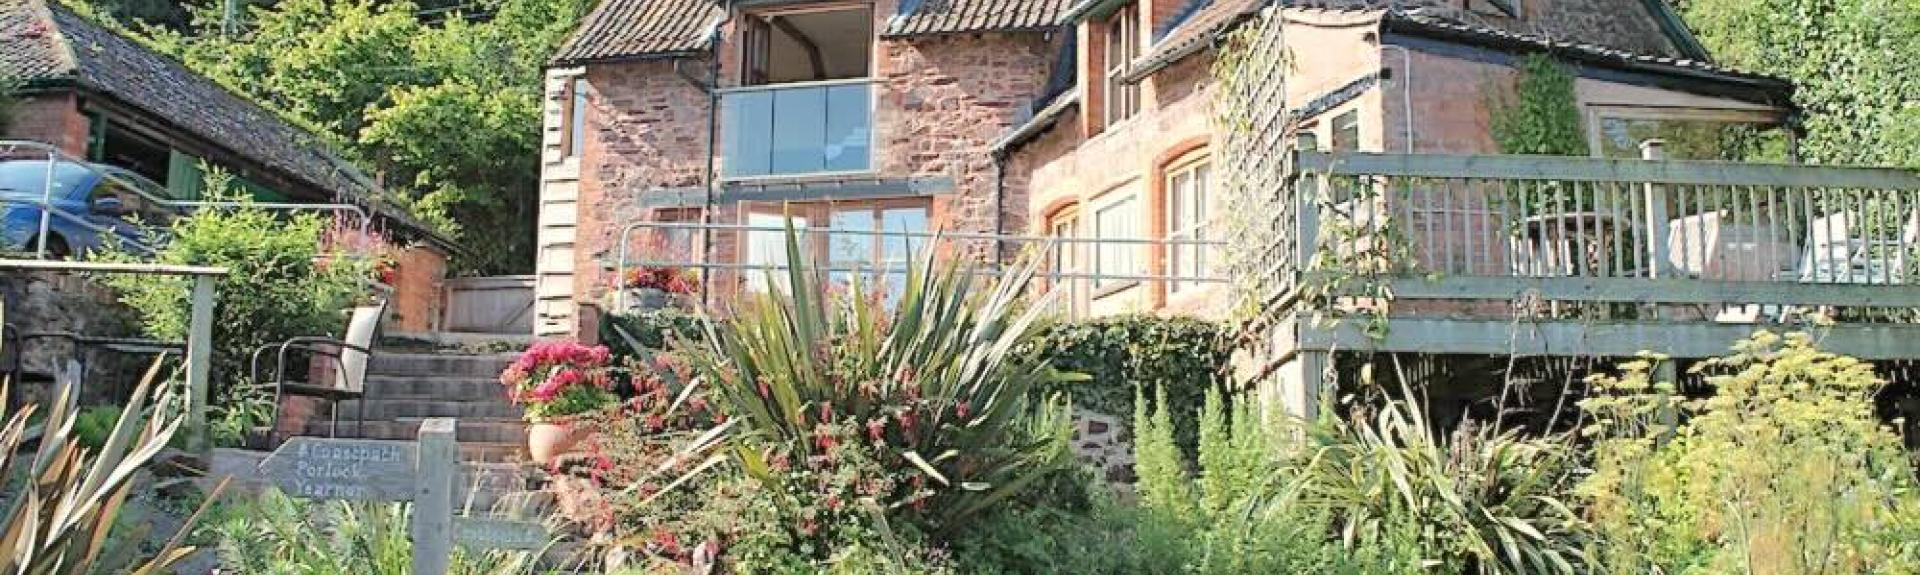 Large, 3-storey coastal holiday cottage surrounded by gardens in Porlock Weir